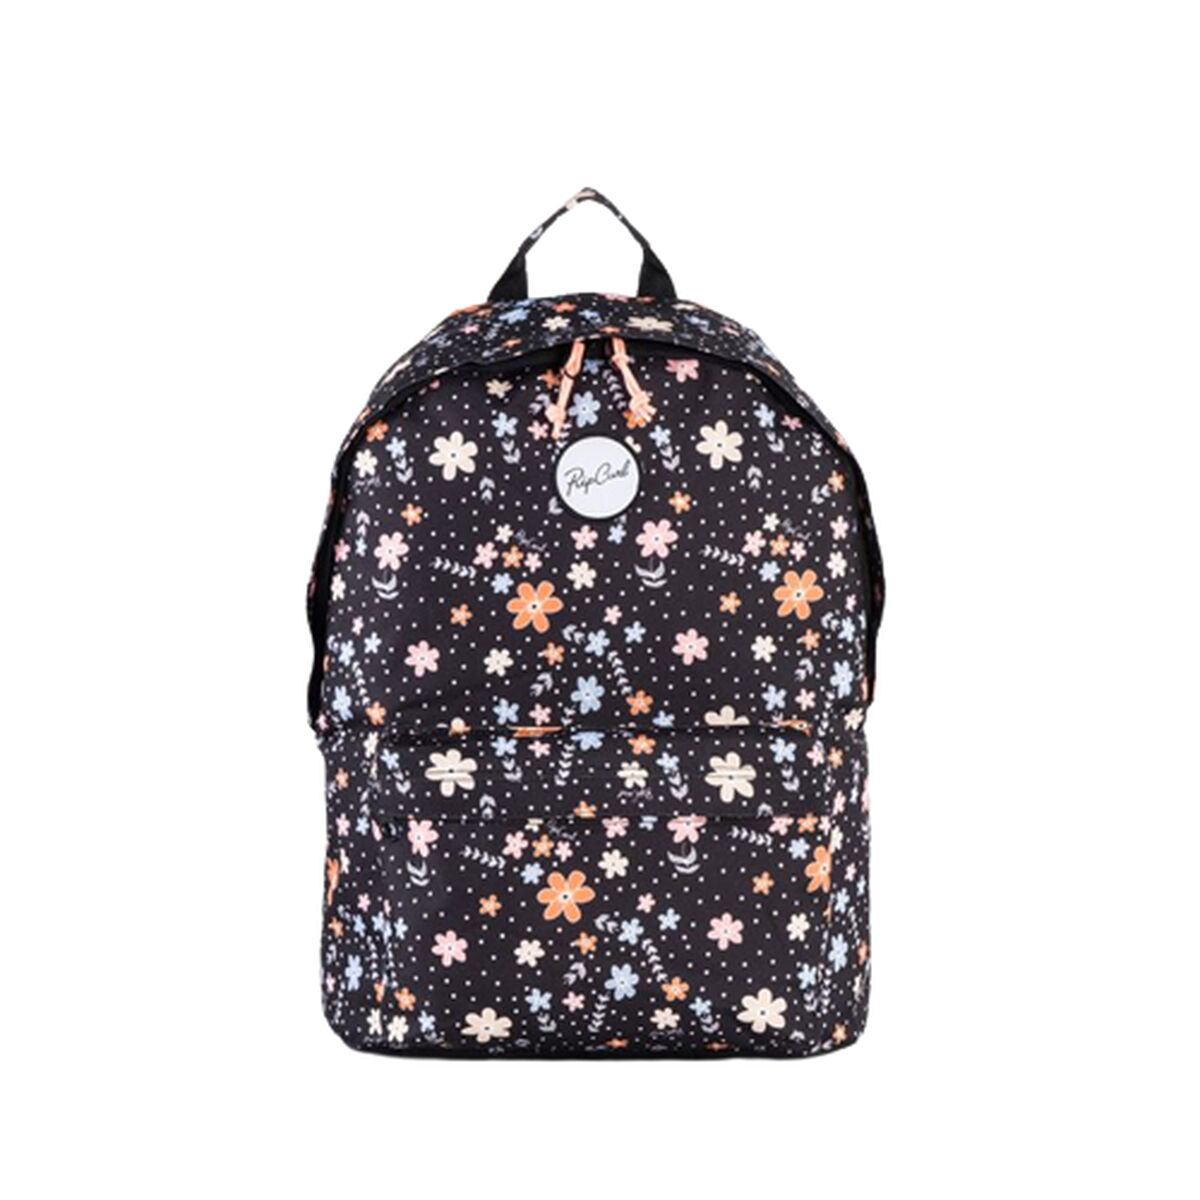 Casual Backpack Rip Curl Dome 2020 Black One size